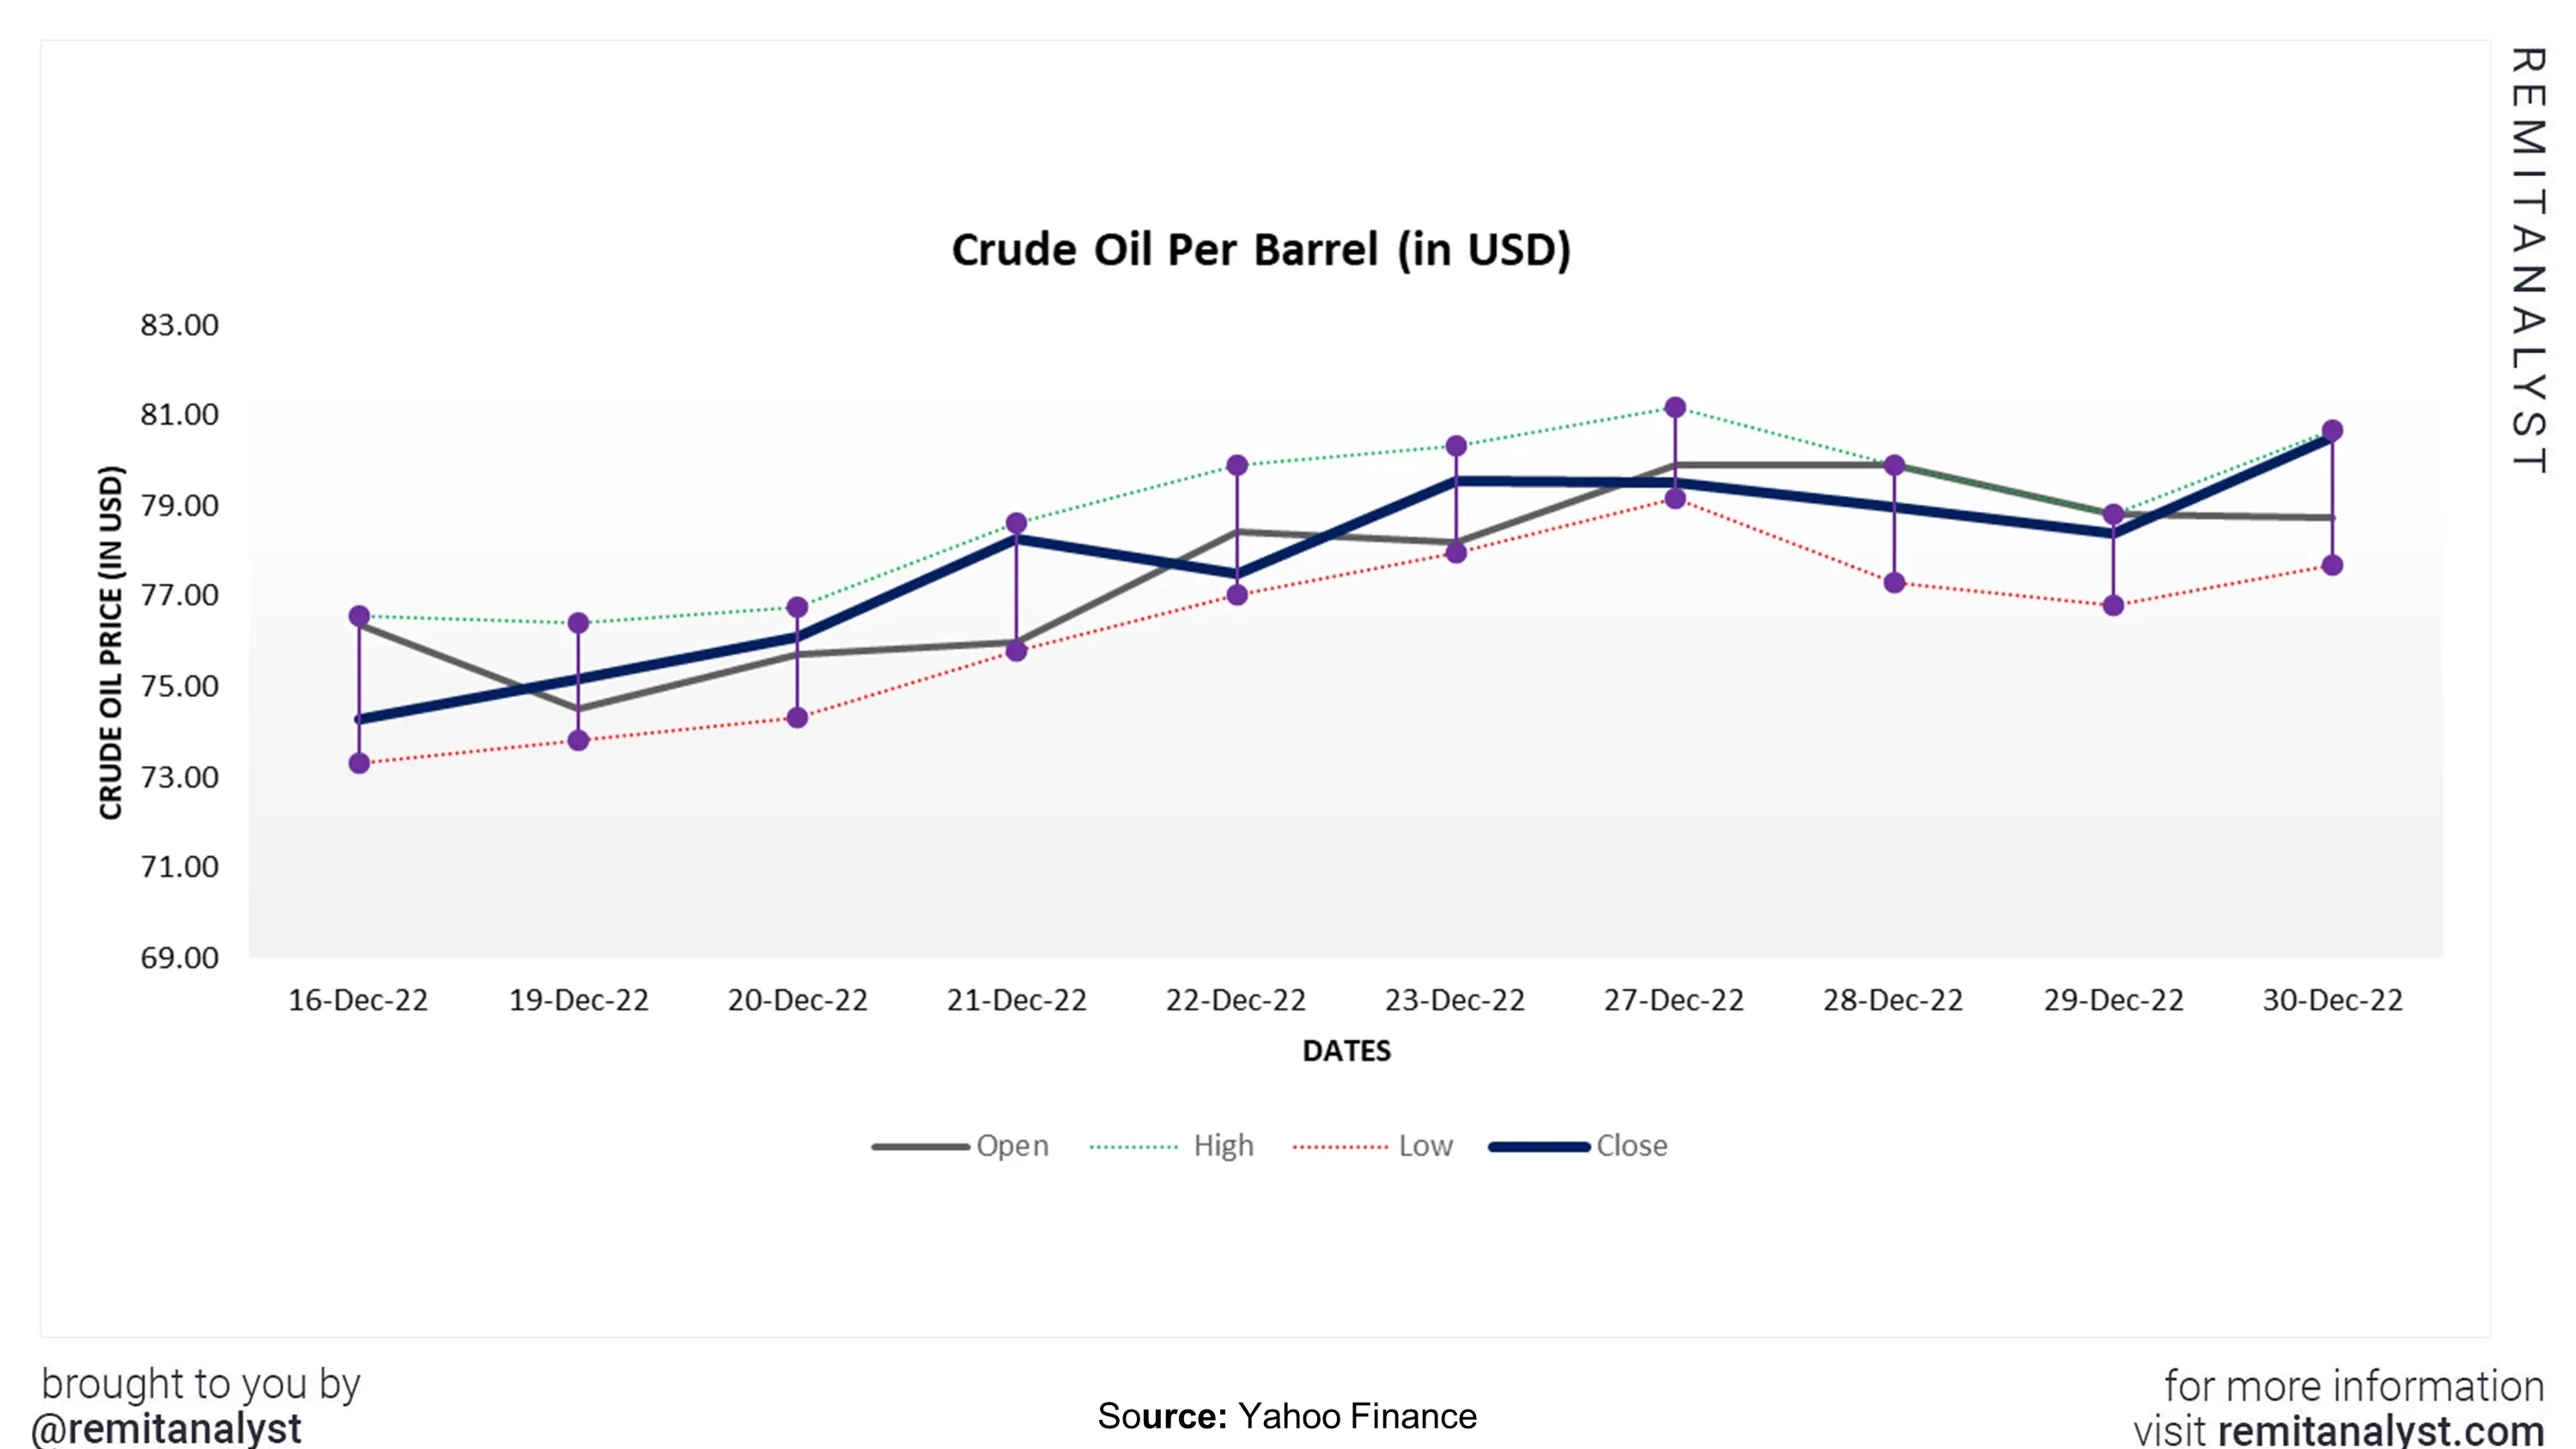 crude-oil-prices-from-16-dec-2022-to-30-dec-2022